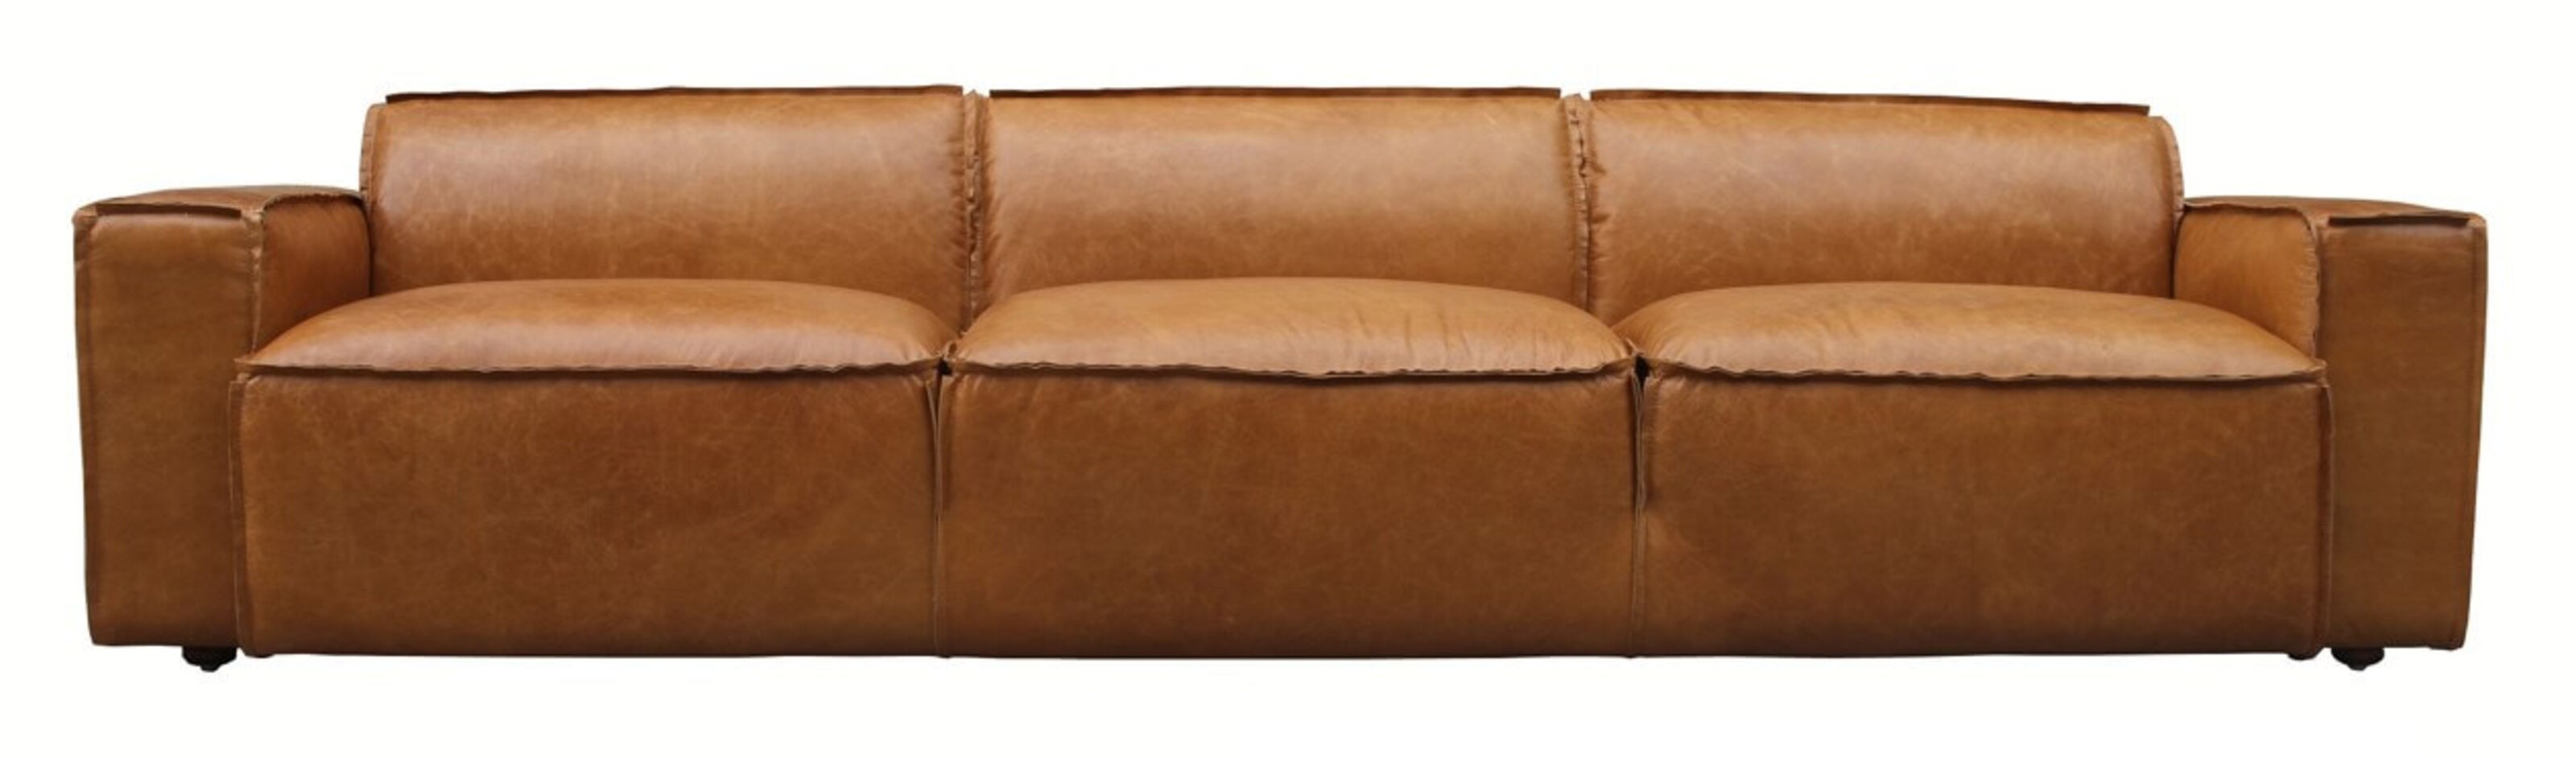 Scruffy 4 Seater Vintage Distressed, Distressed Brown Leather Sofa